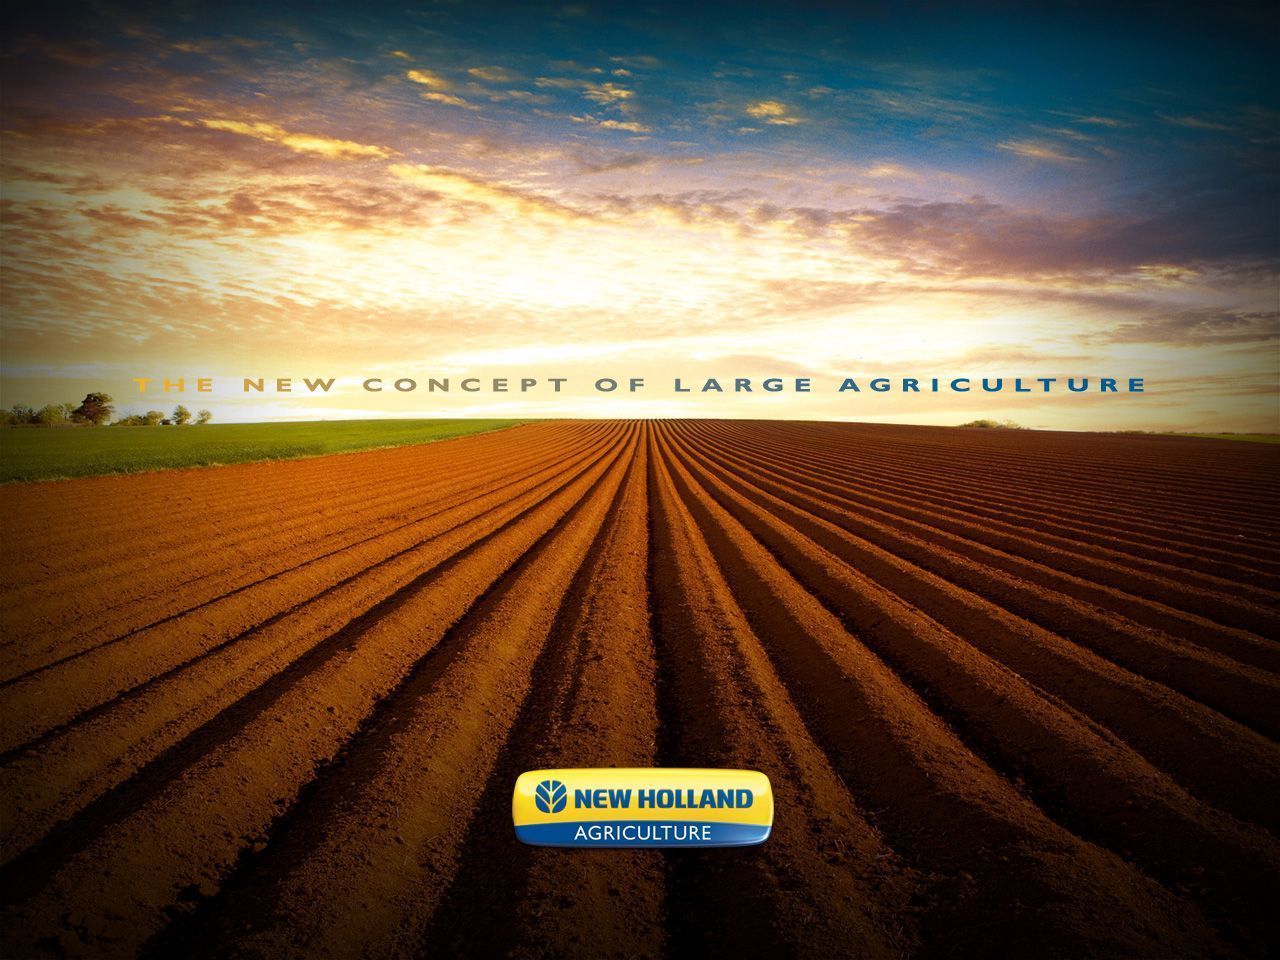 New Holland Agriculture : Wallpapers